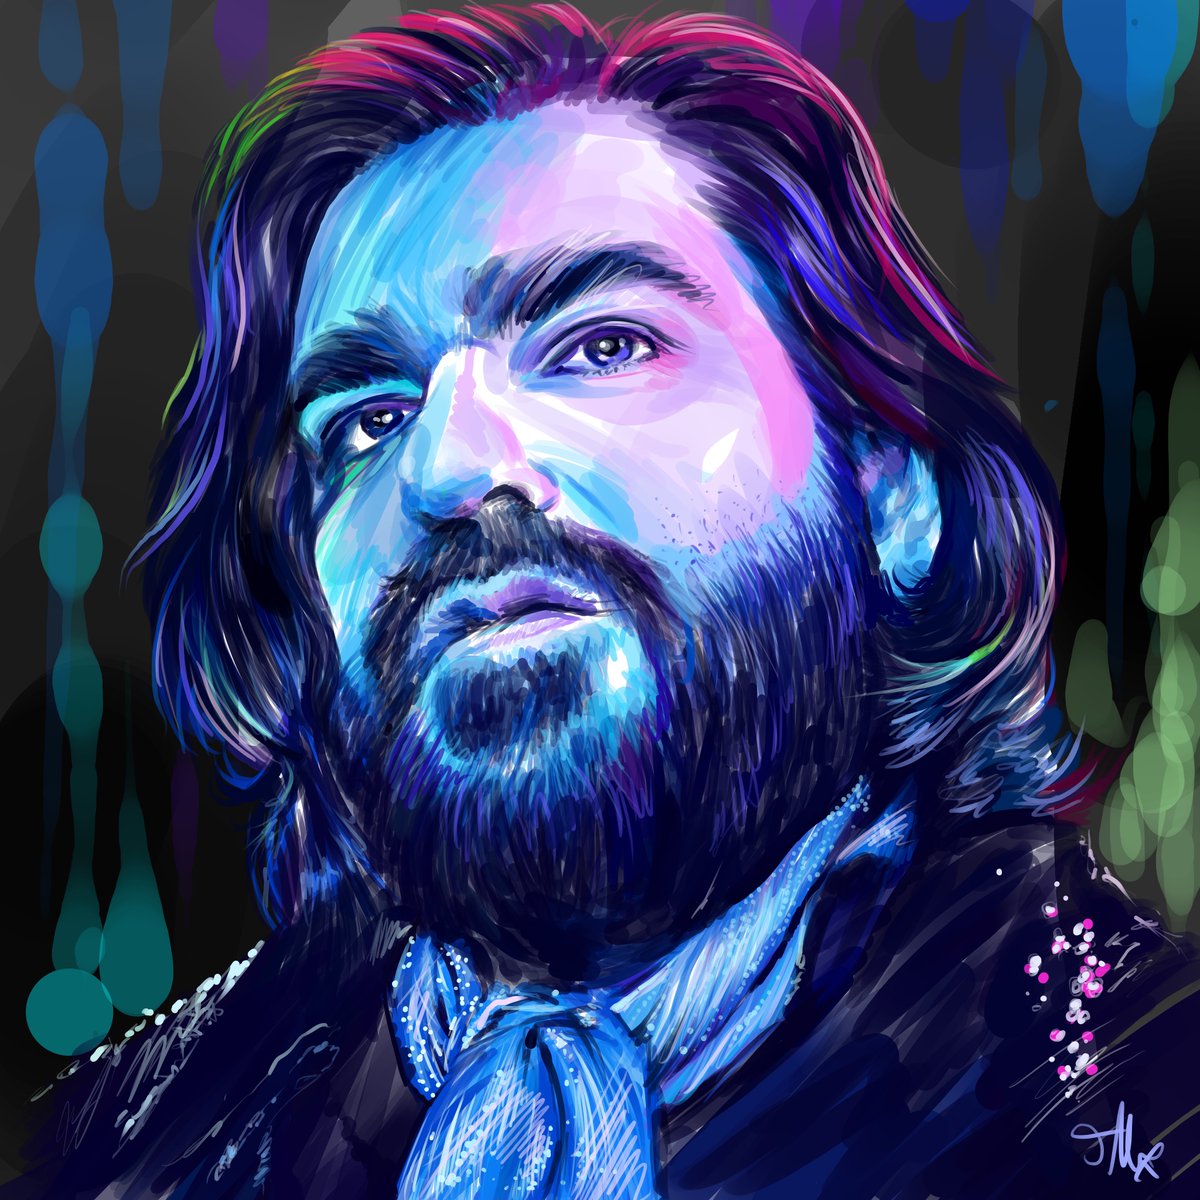 After a couple of rough days I’m feeling a little more human - which is something you can’t accuse this guy of! Wanted to draw some WWDITS after remembering @porksmith’s Laszlo in this gorgeous photo shoot 💙 #whatwedointheshadows #wwdits #laszlo #laszlocravensworth #mattberry